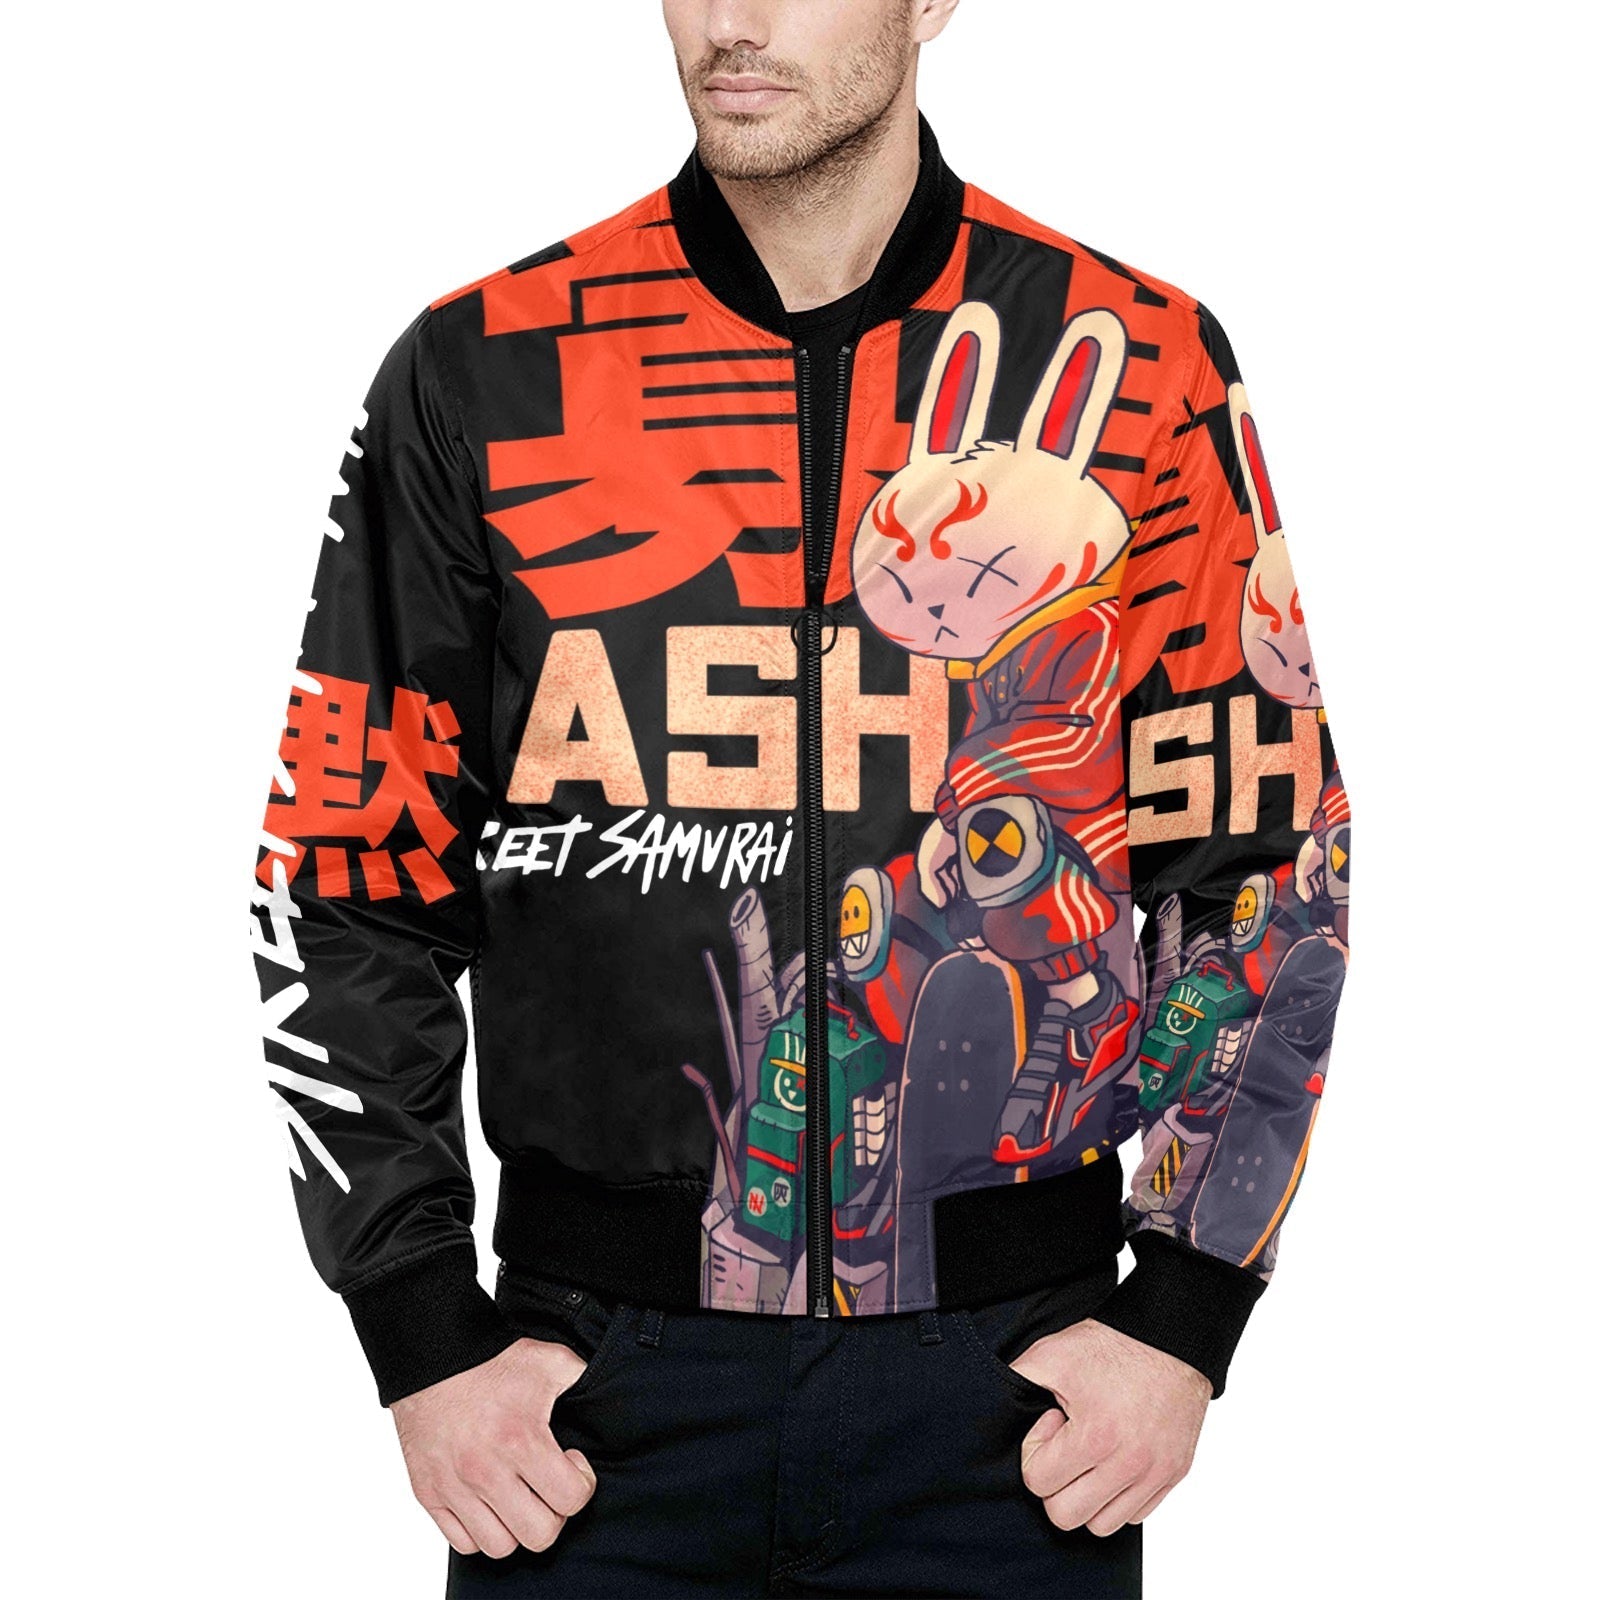 Street Samurai Quilted Bomber Jacket - The Shade Room Shop